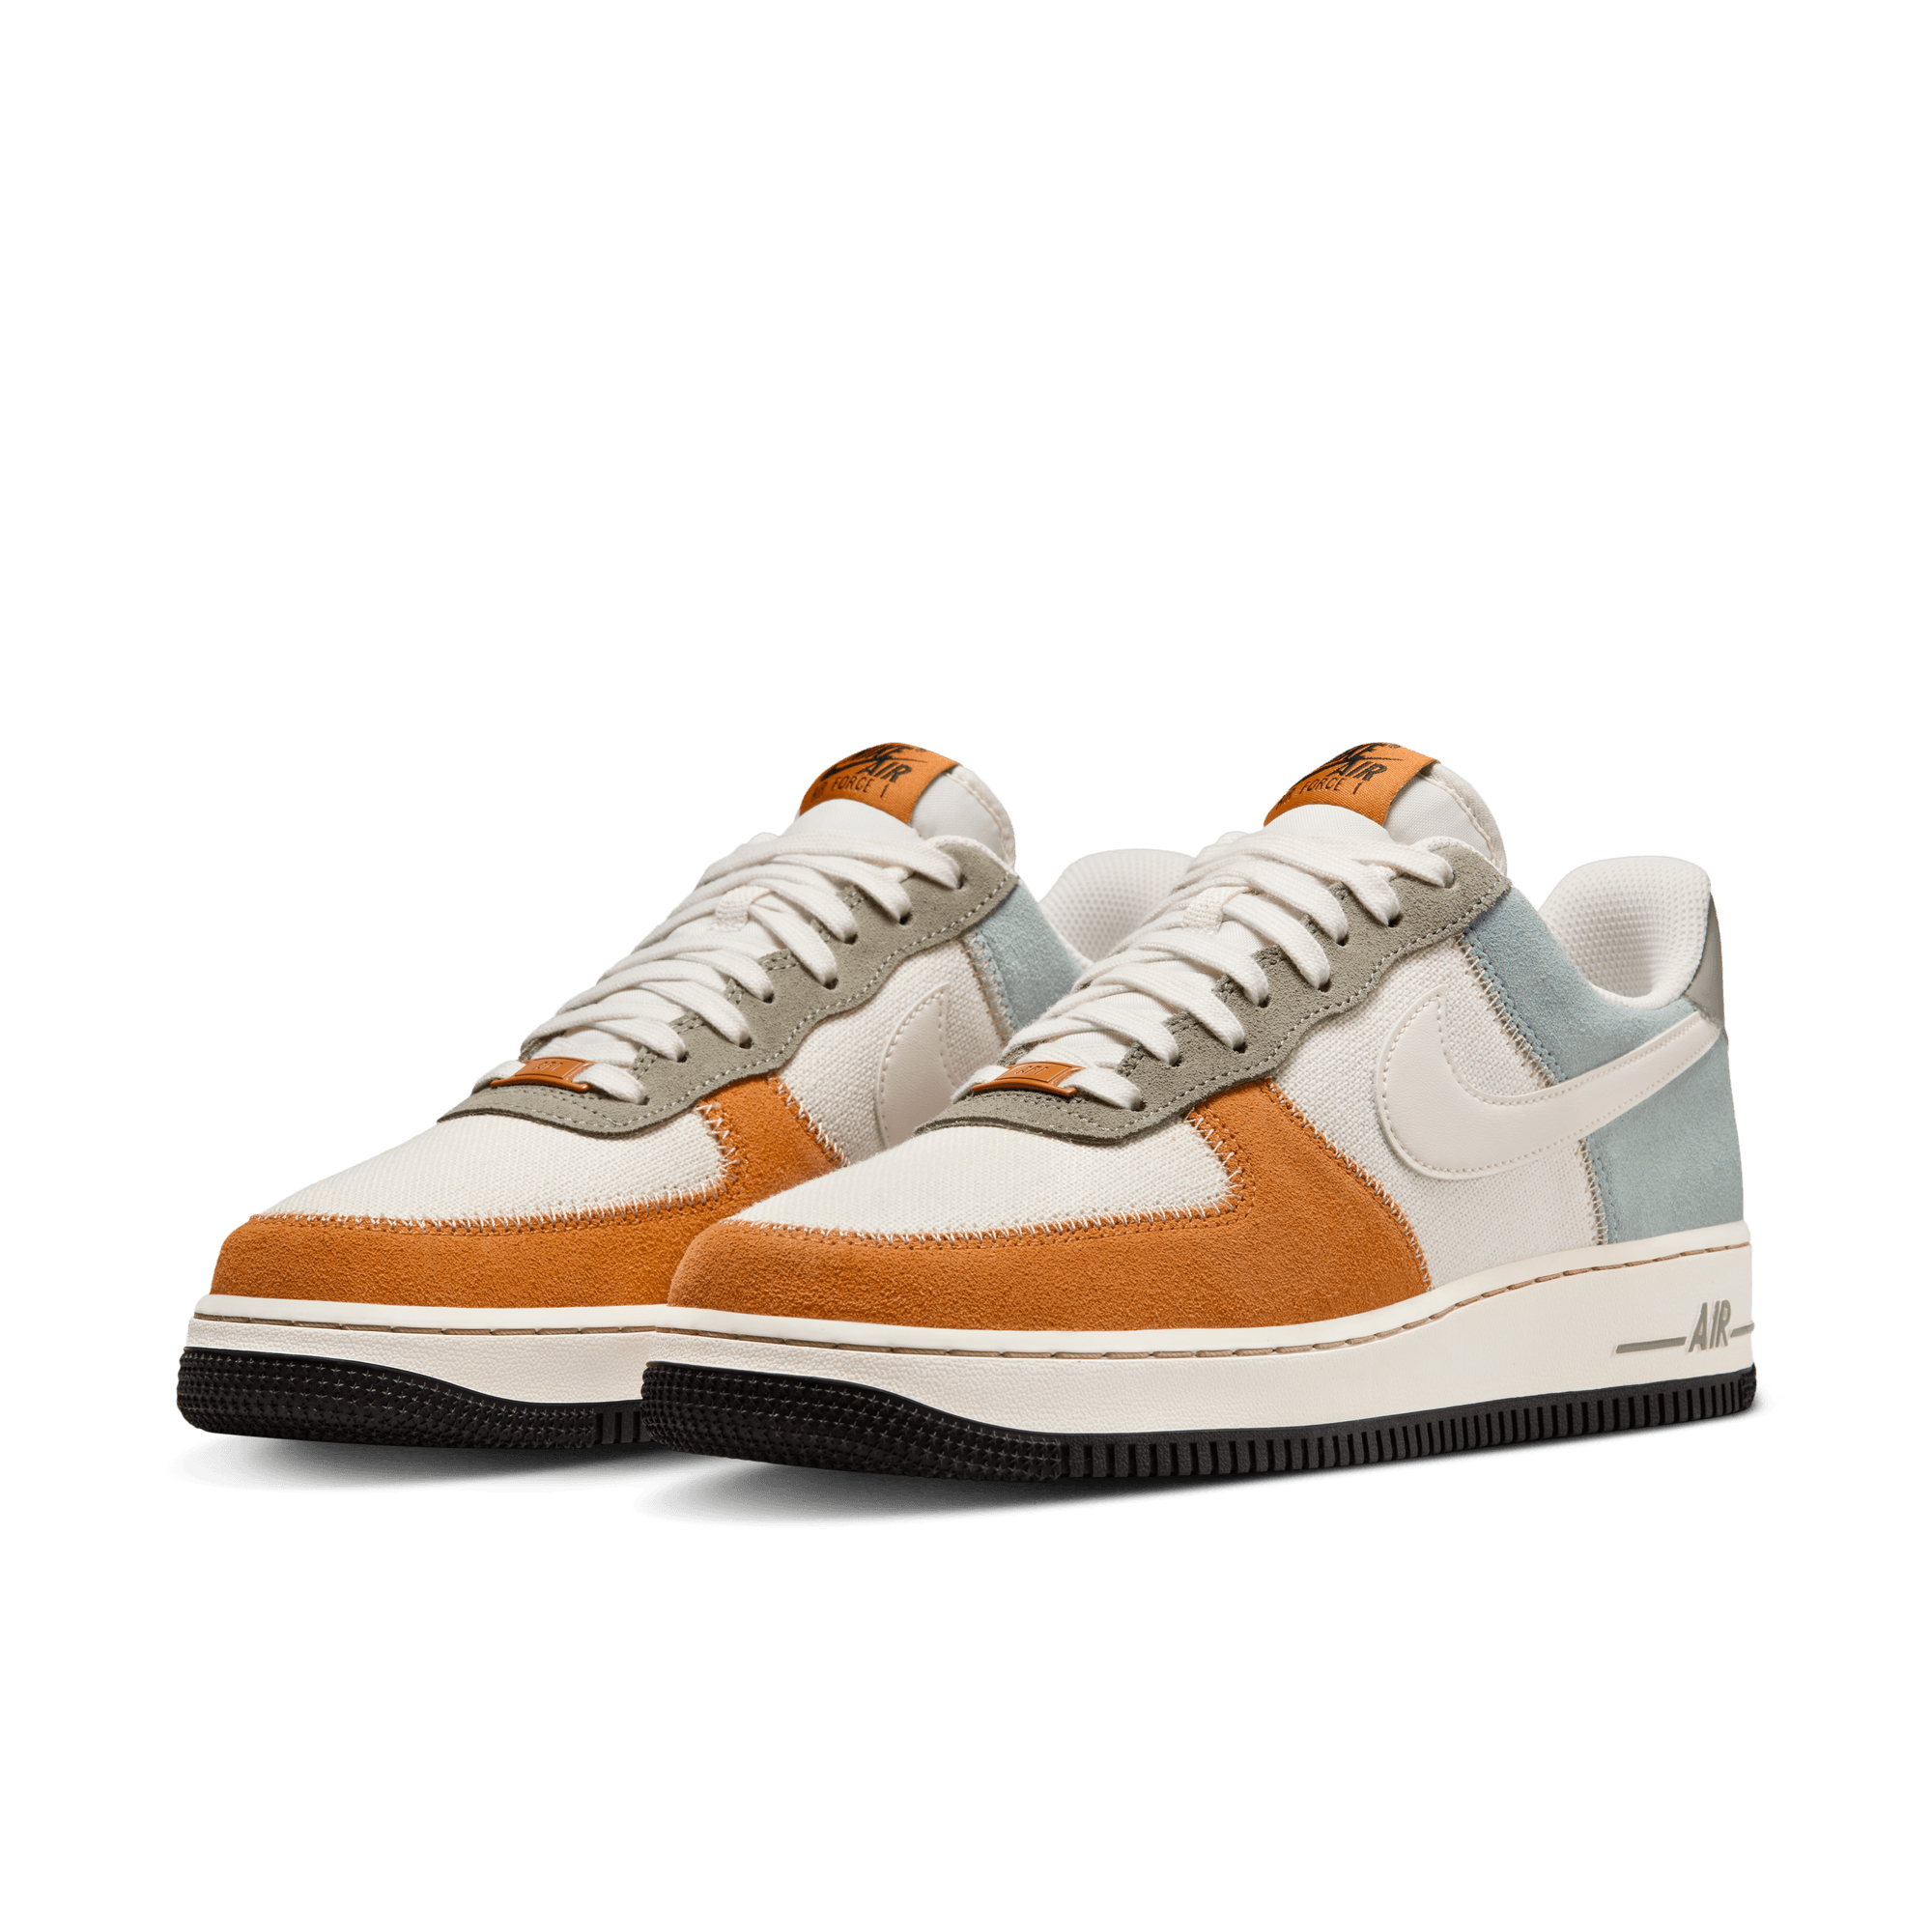 AIR FORCE 1 `07 LV8 EMB "PALE IVORY"